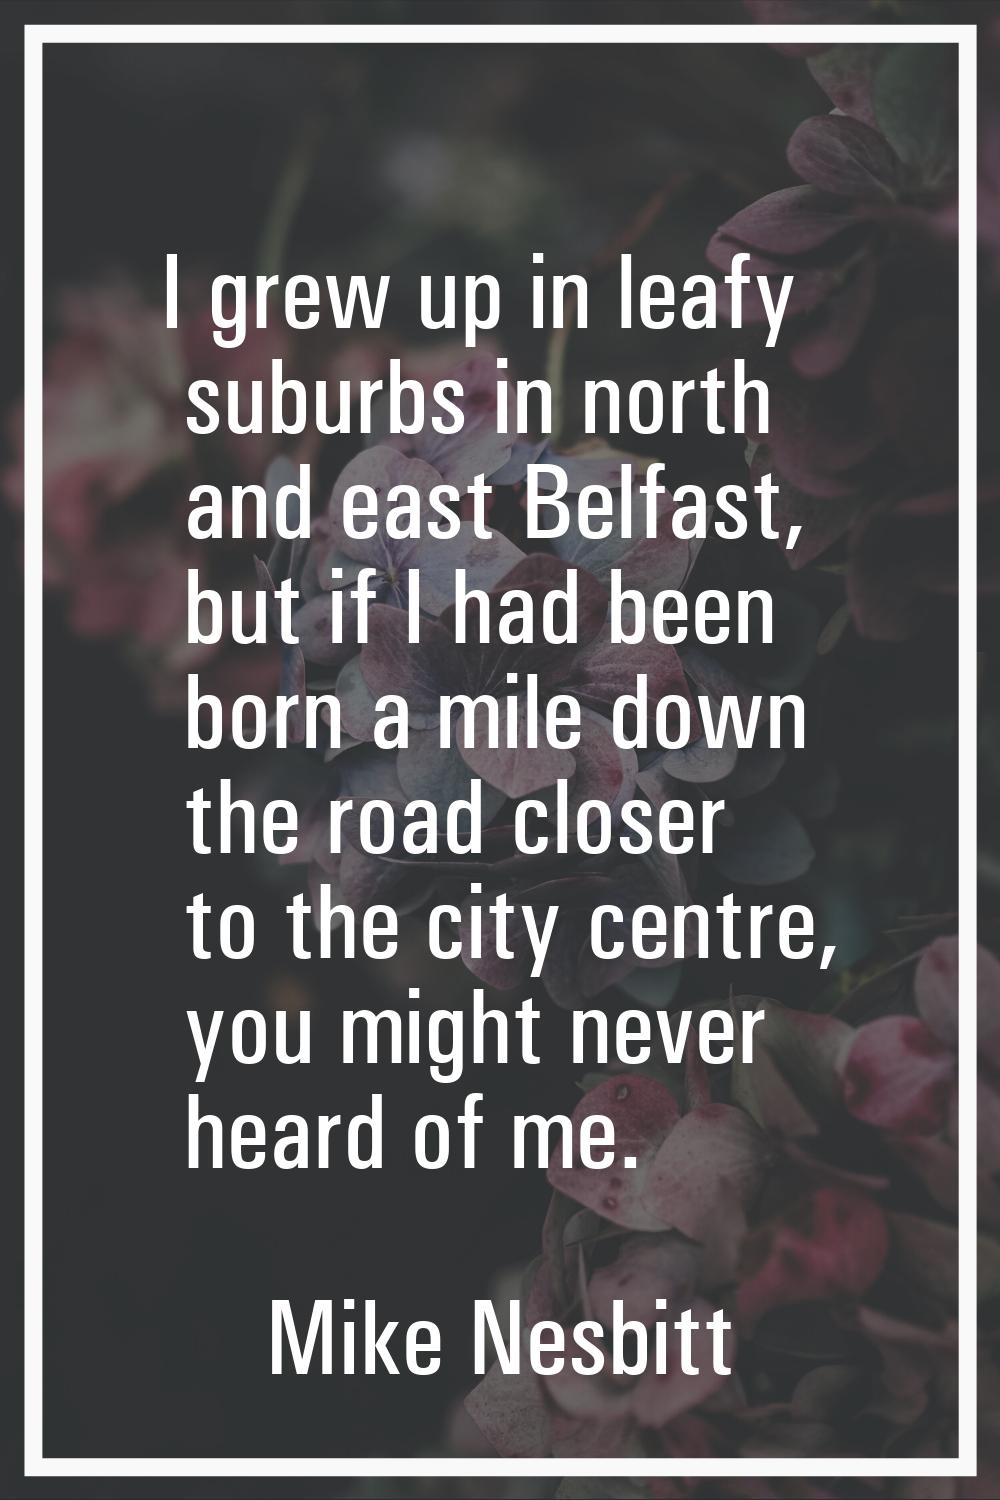 I grew up in leafy suburbs in north and east Belfast, but if I had been born a mile down the road c